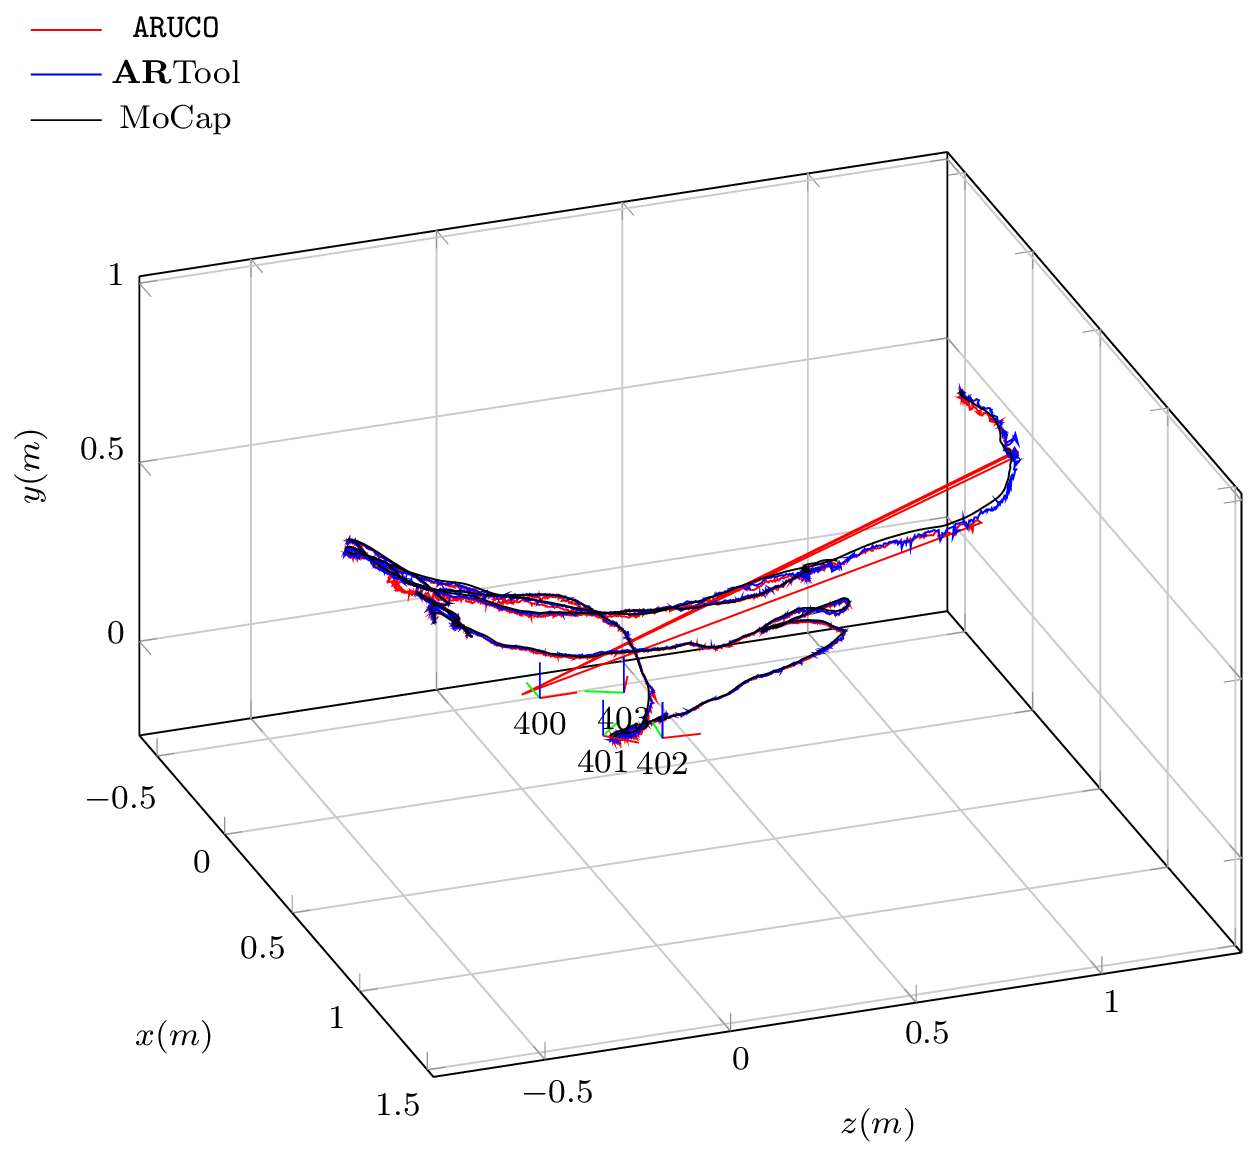 3D representation of ego-localization results. Position, code and orientation of markers are reported. Note that the ARUCO library sometimes loses the tracking and this is marked by jumps/skips in the red trajectory